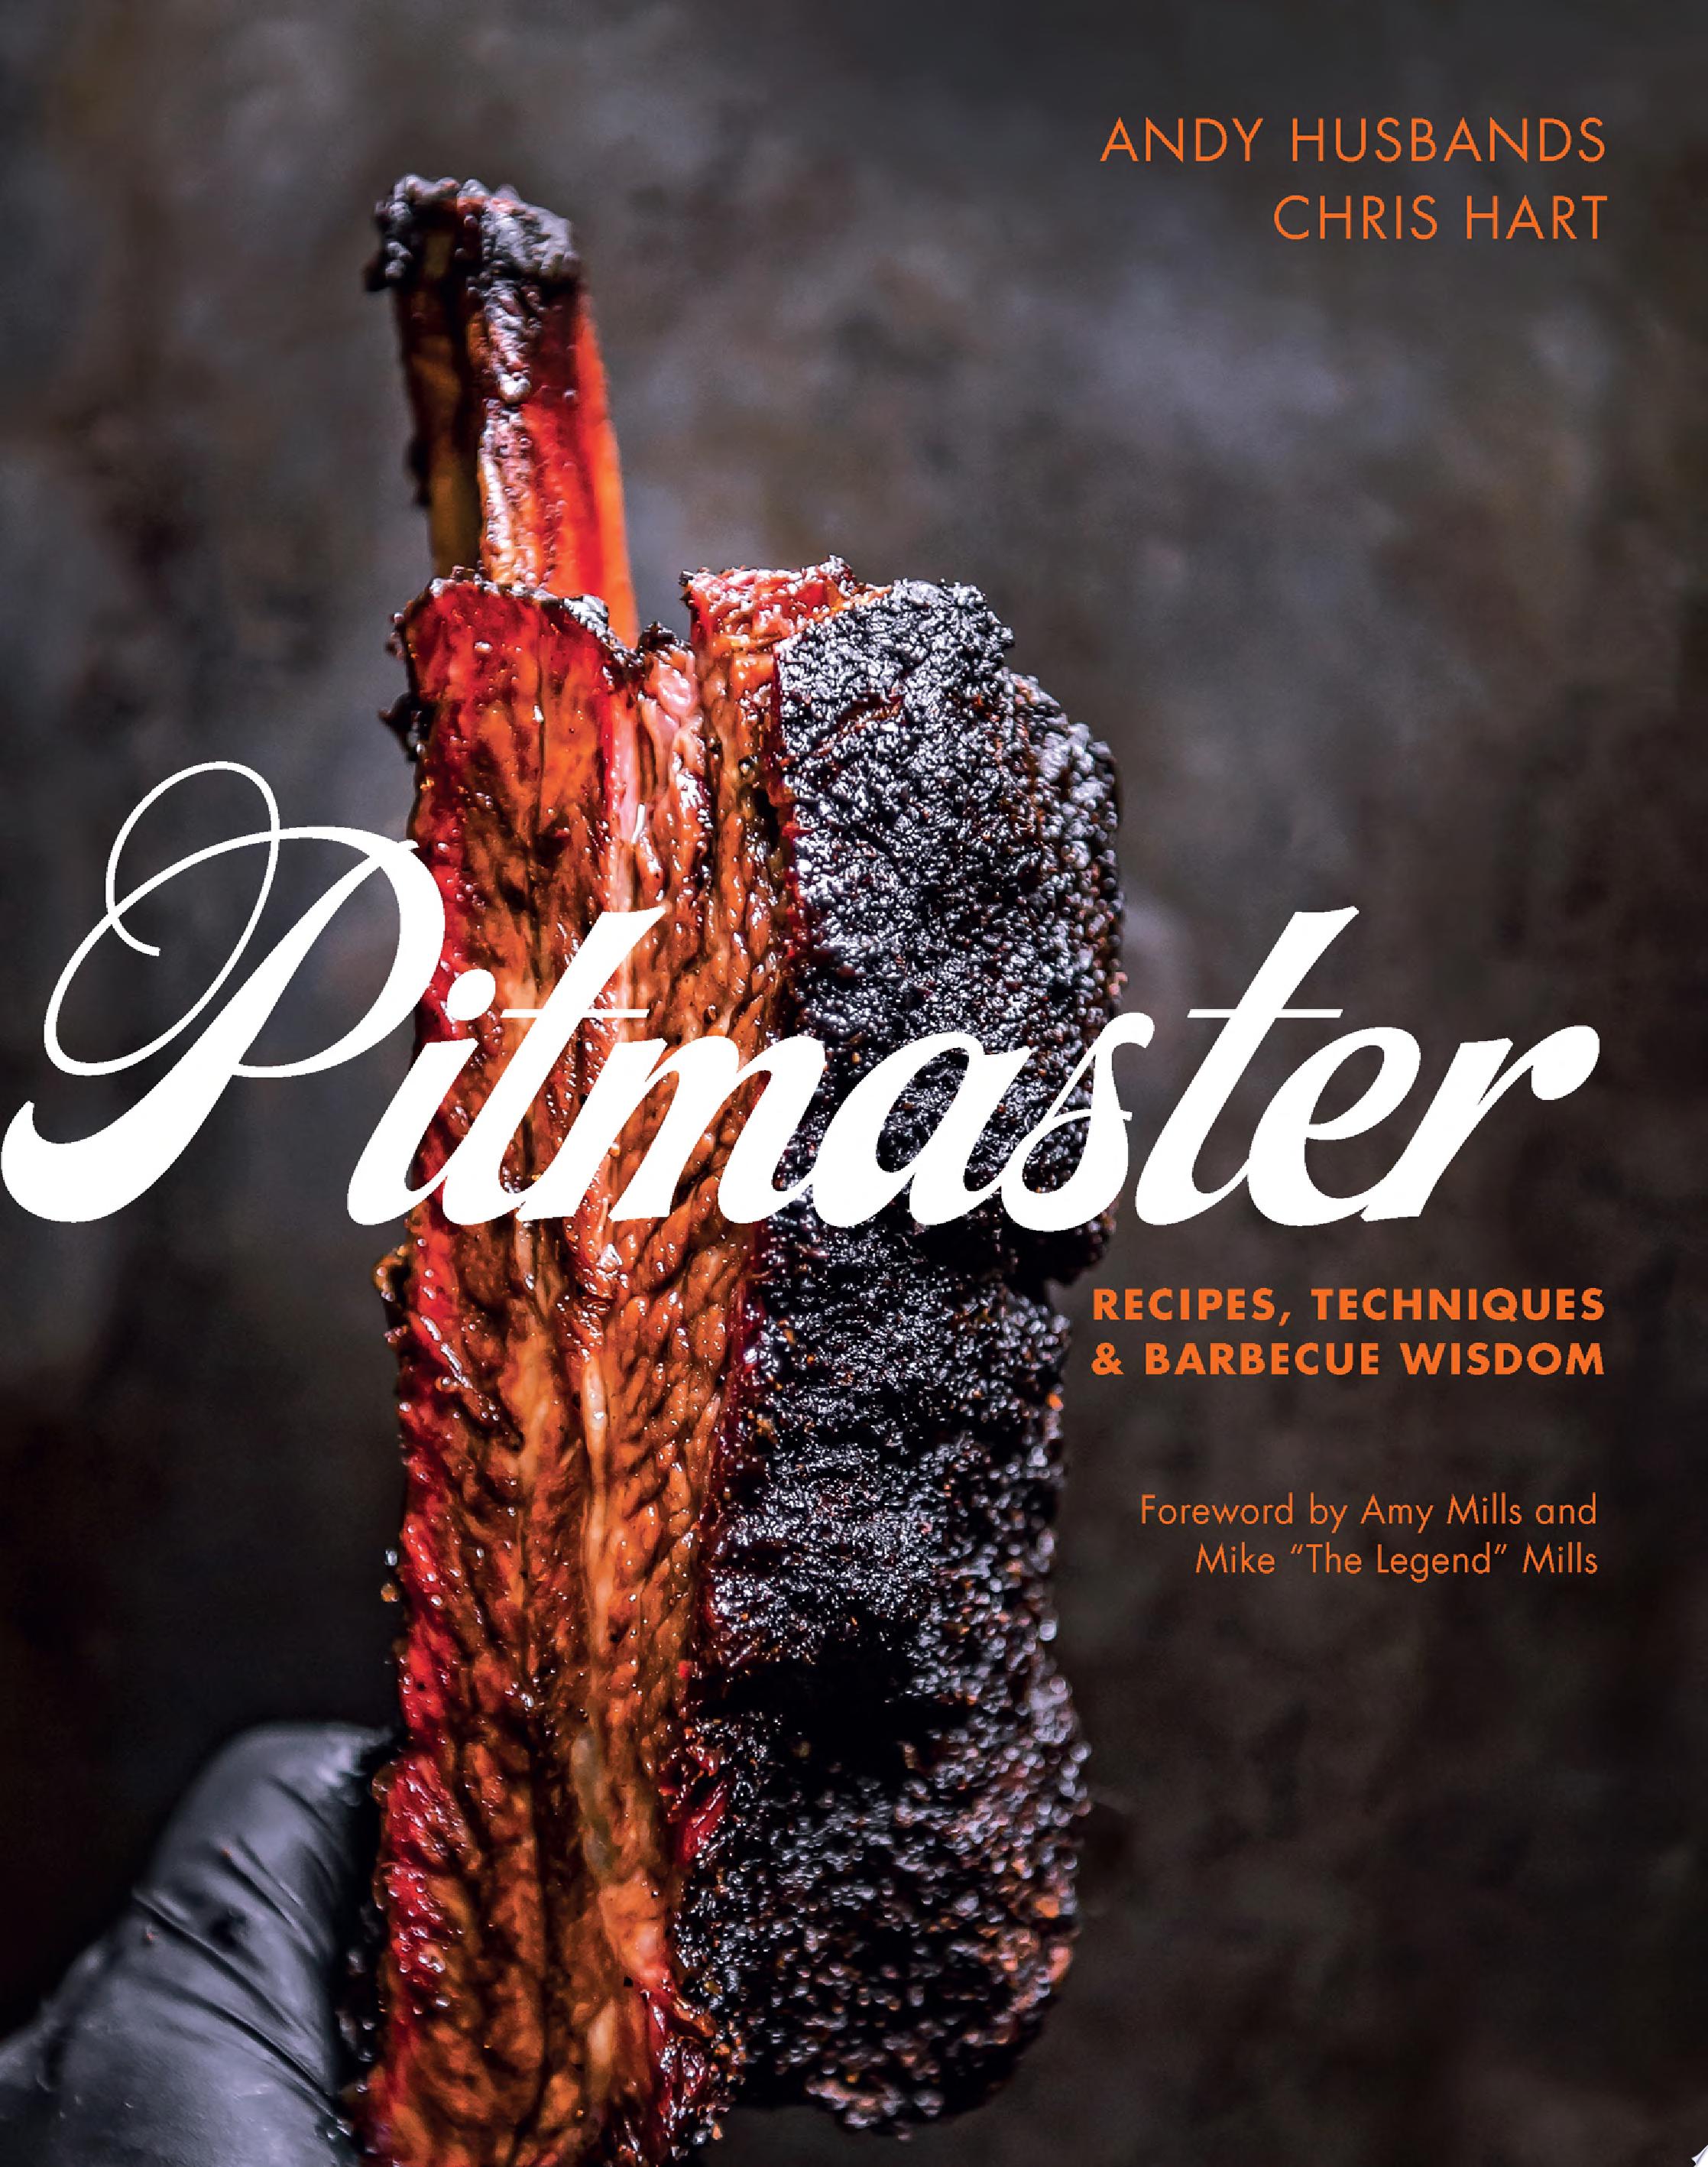 Image for "Pitmaster"